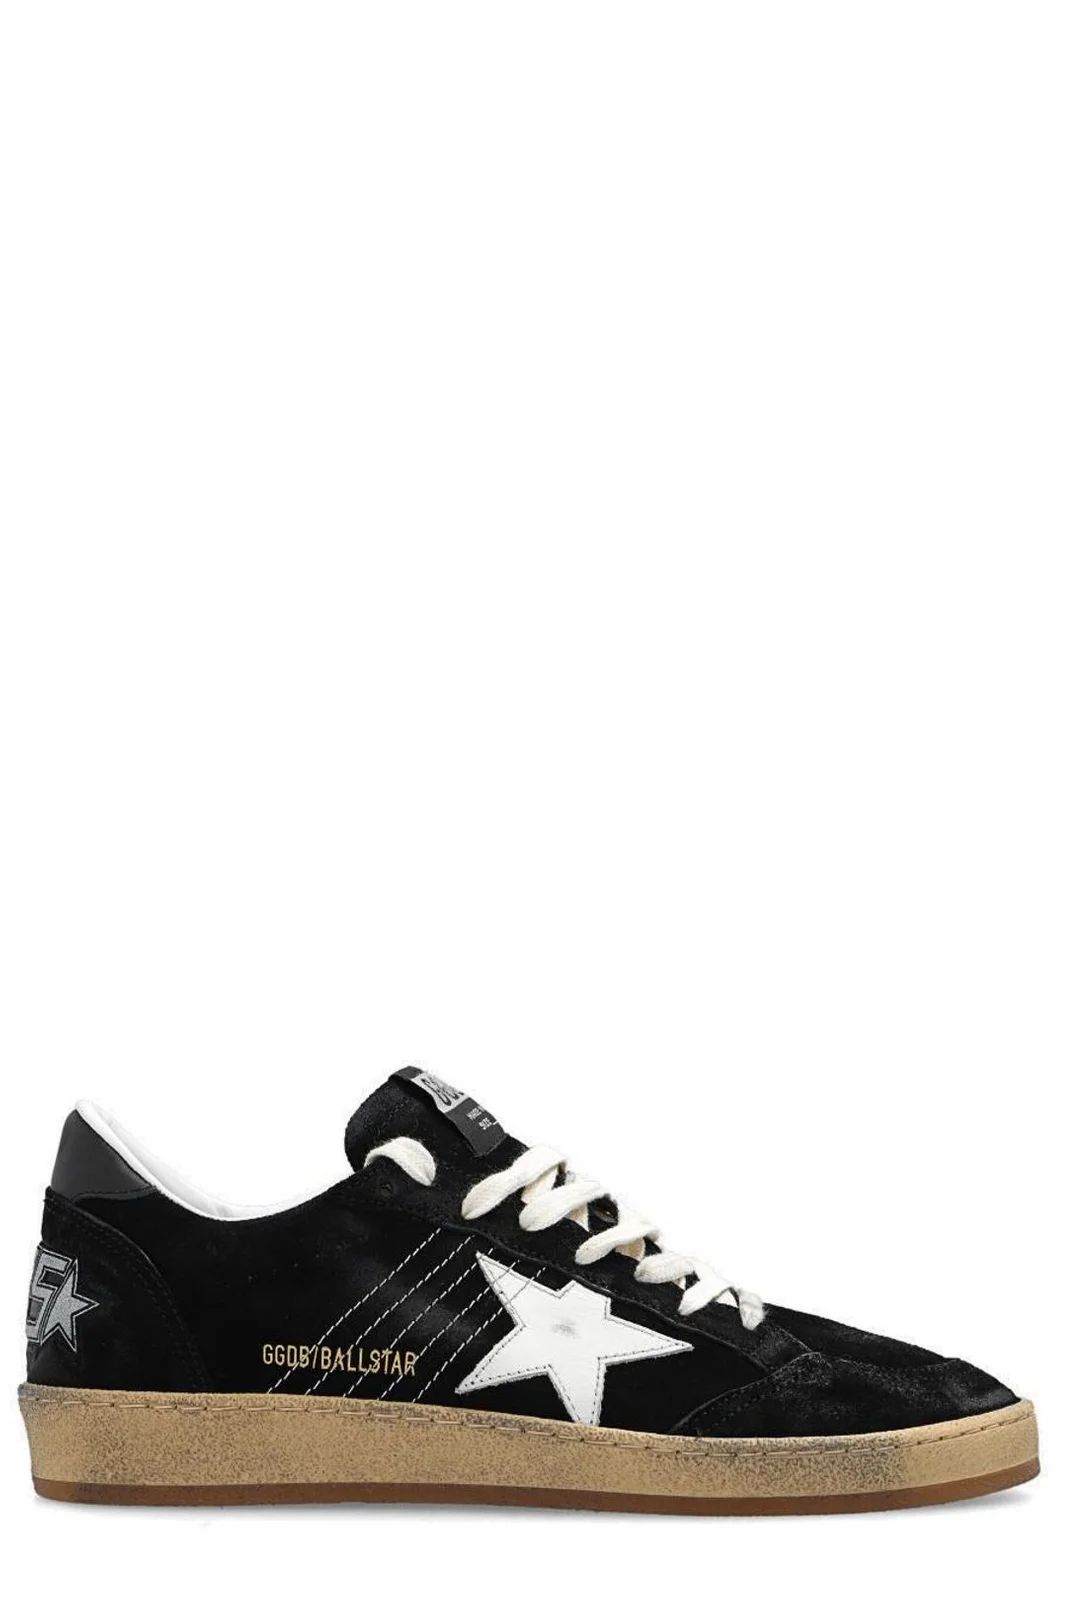 Golden Goose Deluxe Brand Ballstar Laced Sneakers | Cettire Global